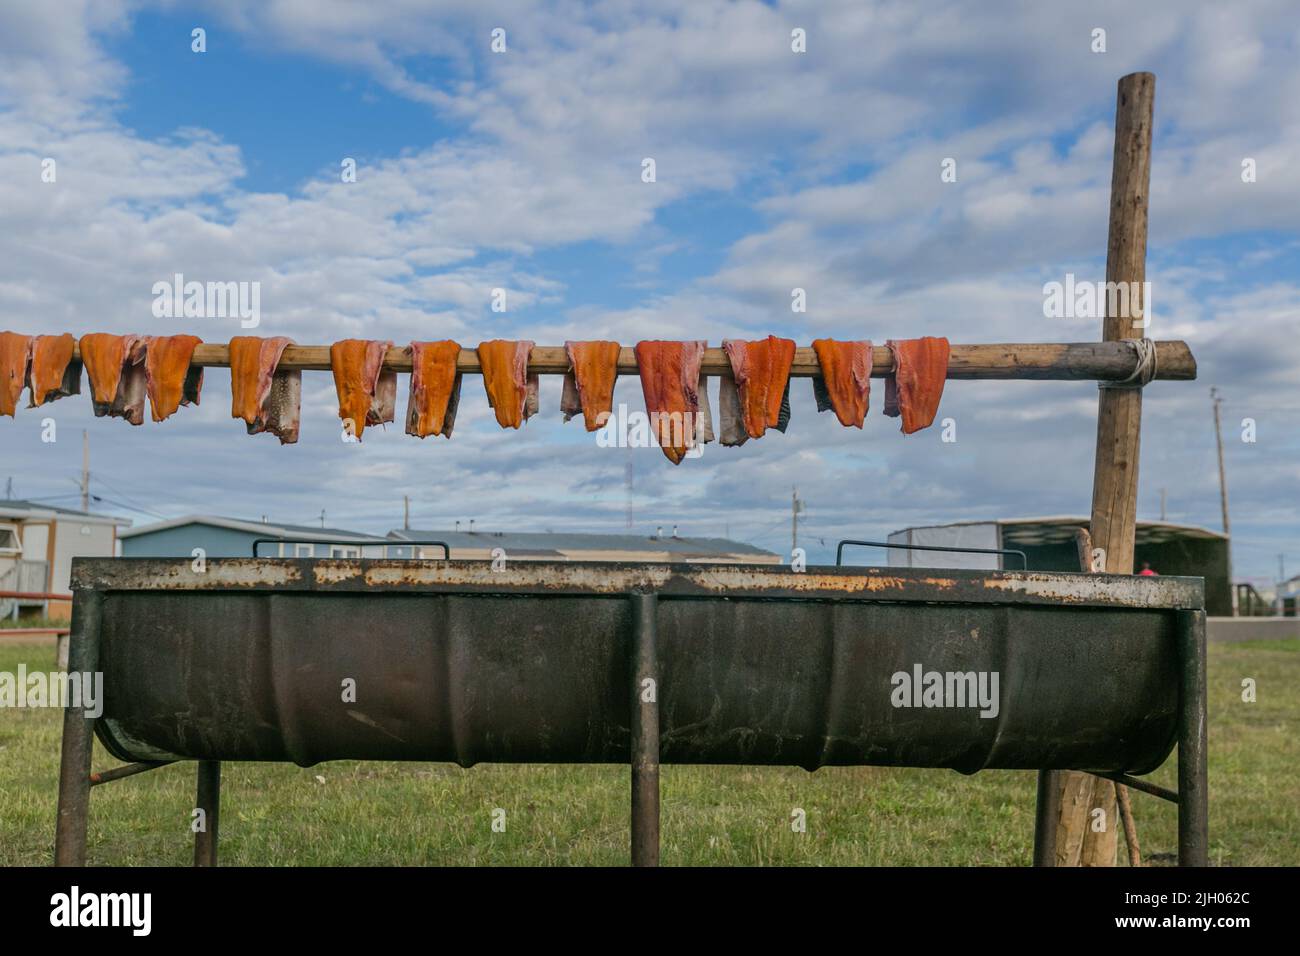 Fillets of Lake Trout being smoked above fire in the northern Indigenous community of Deline, Northwest Territories, Canada. Smoked fish is one of the Stock Photo